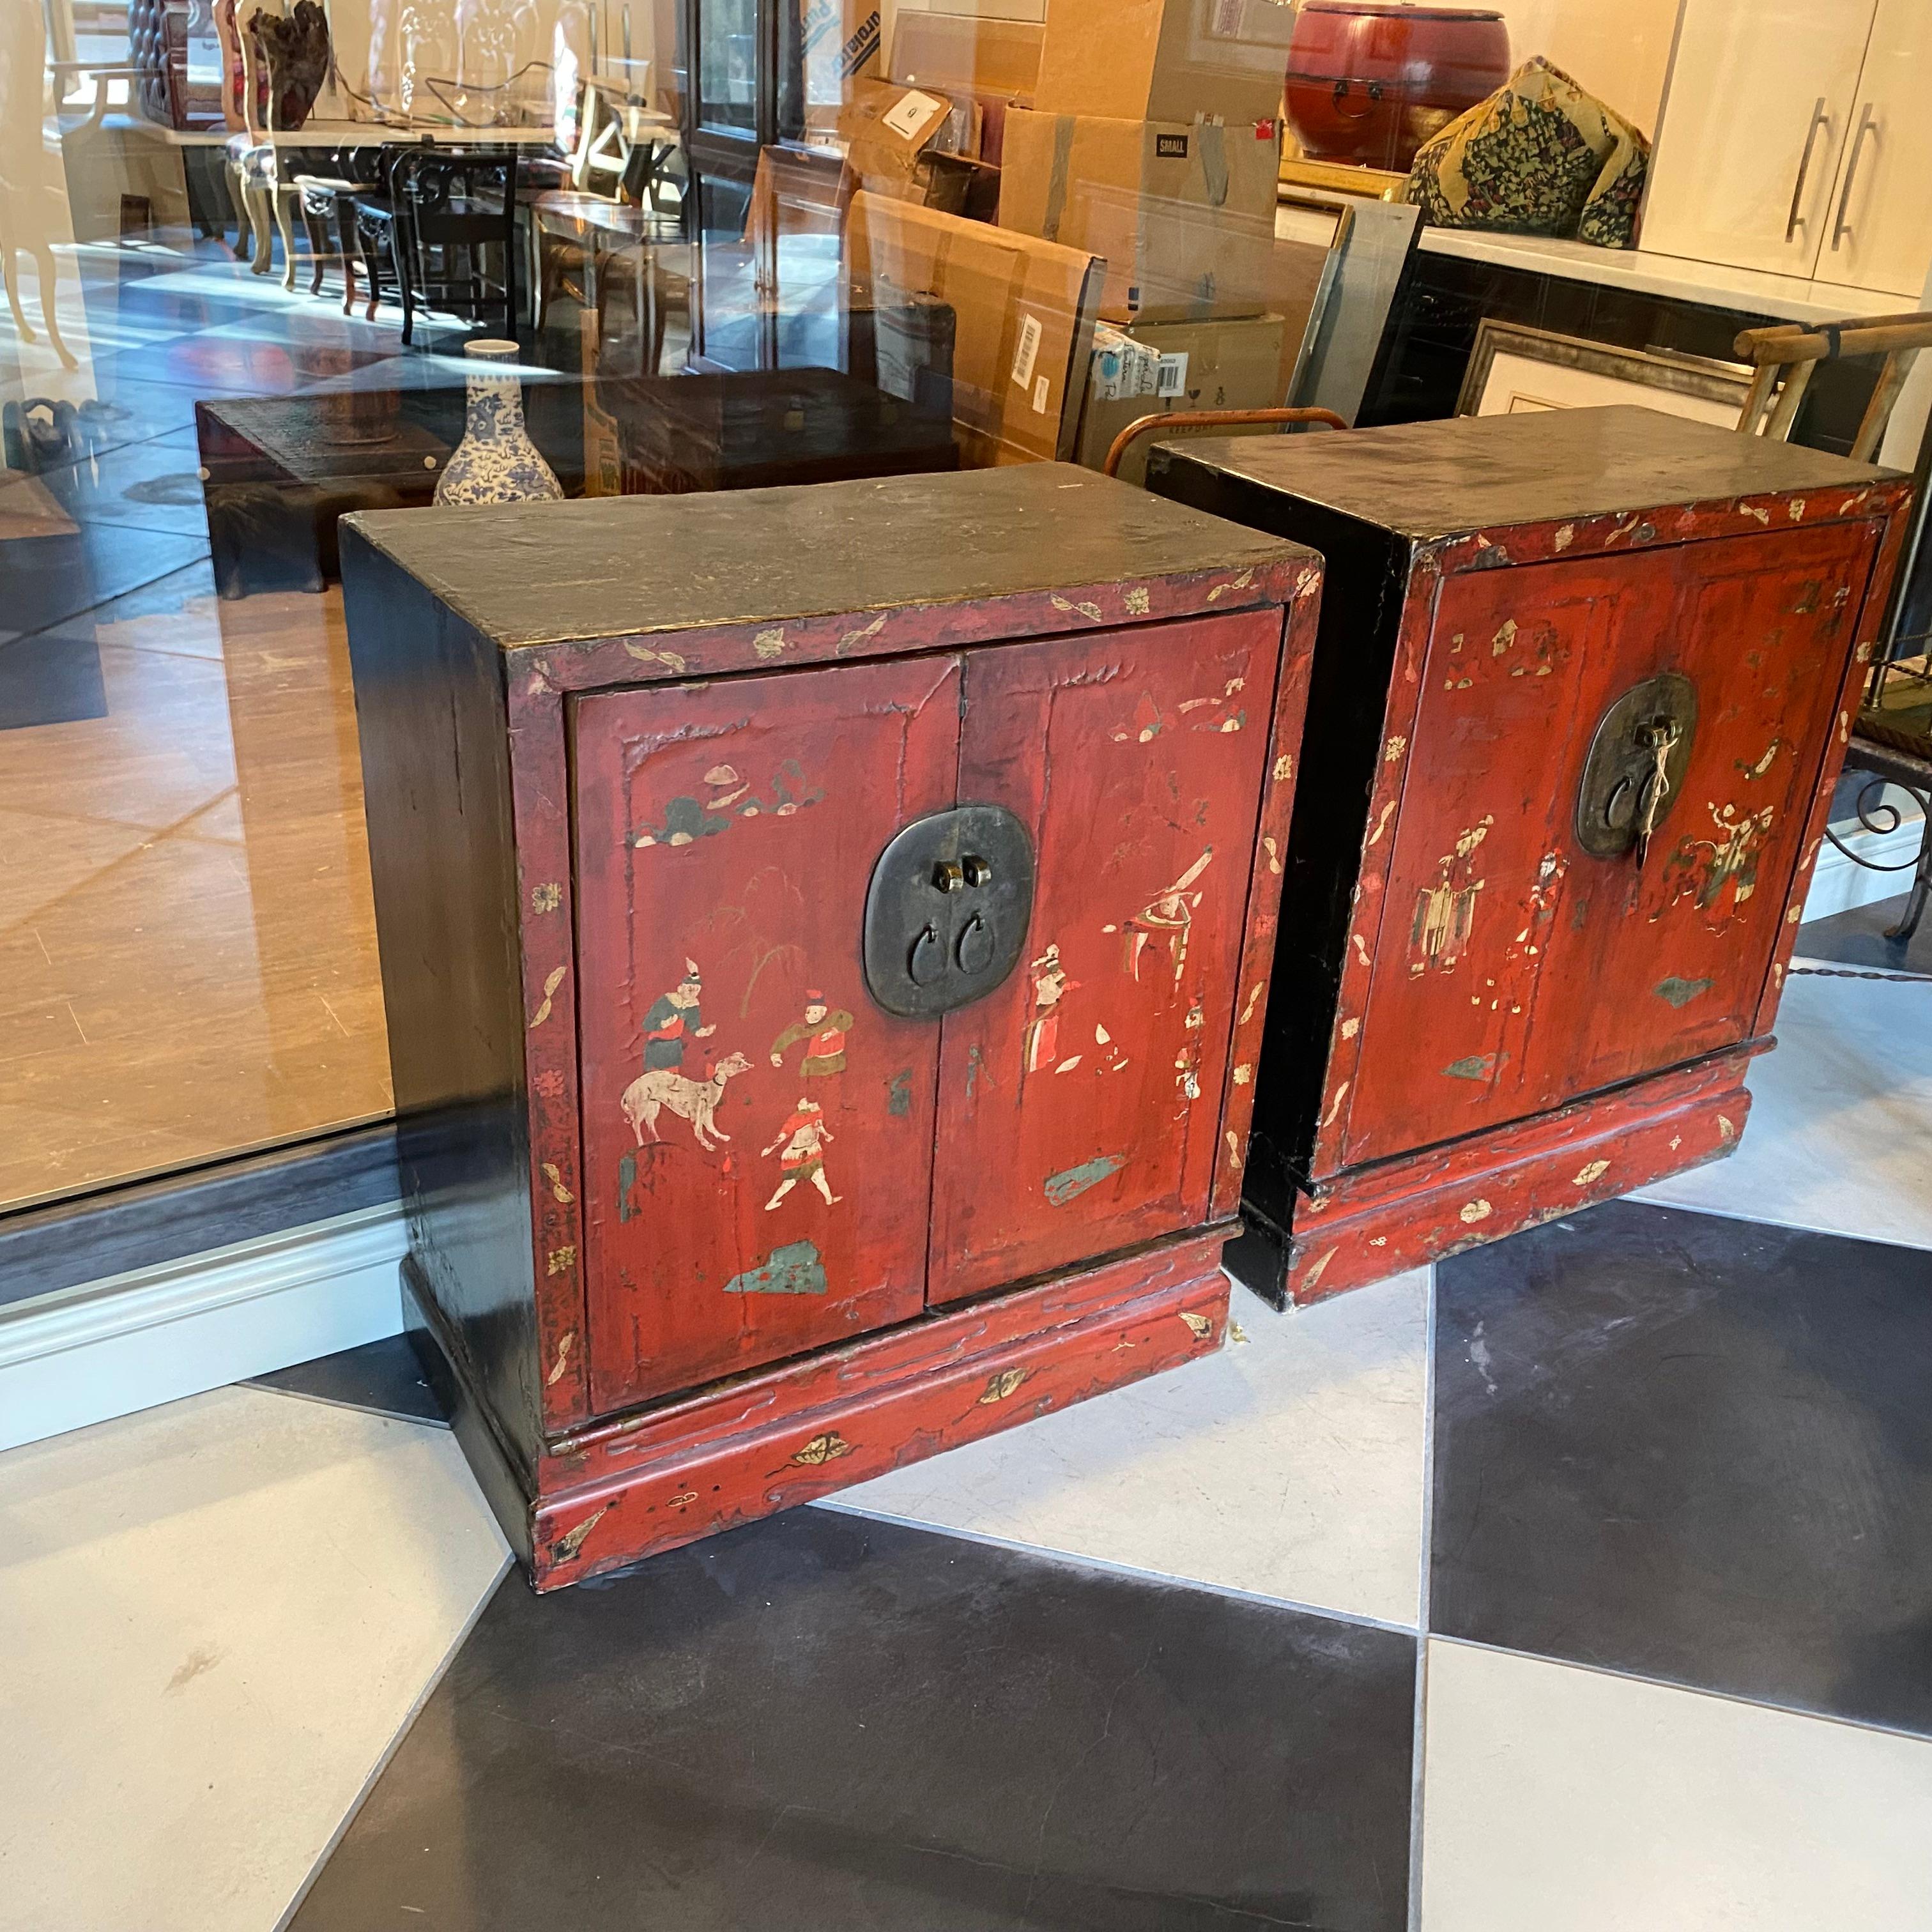 This Pair of Red Lacquered CABINETS having 2 doors each, are hand made and red lacquered 